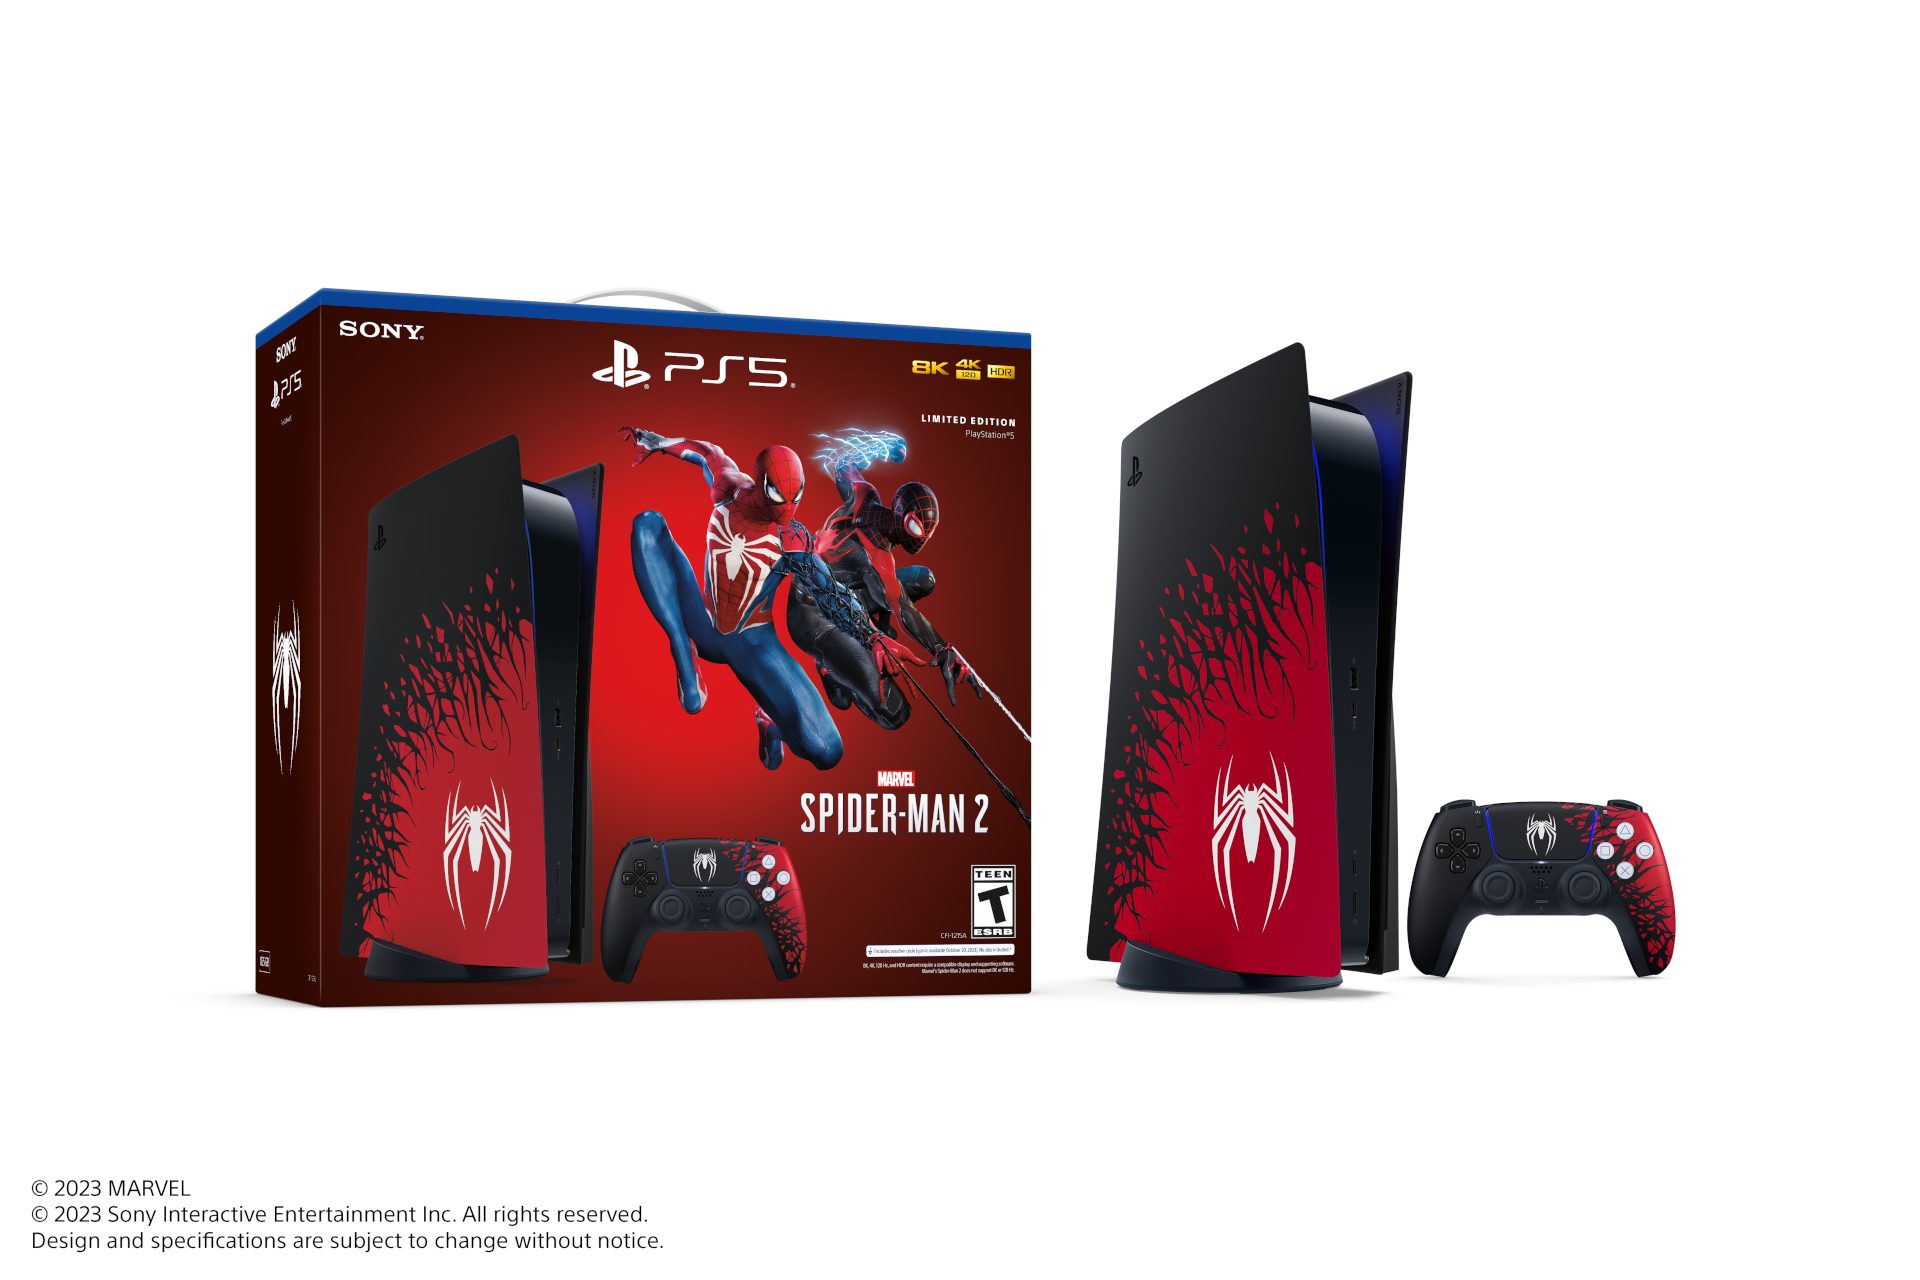 Pre-orders begin July 28 for this striking new design inspired by Marvel’s Spider-Man 2 in-game Symbiote. 